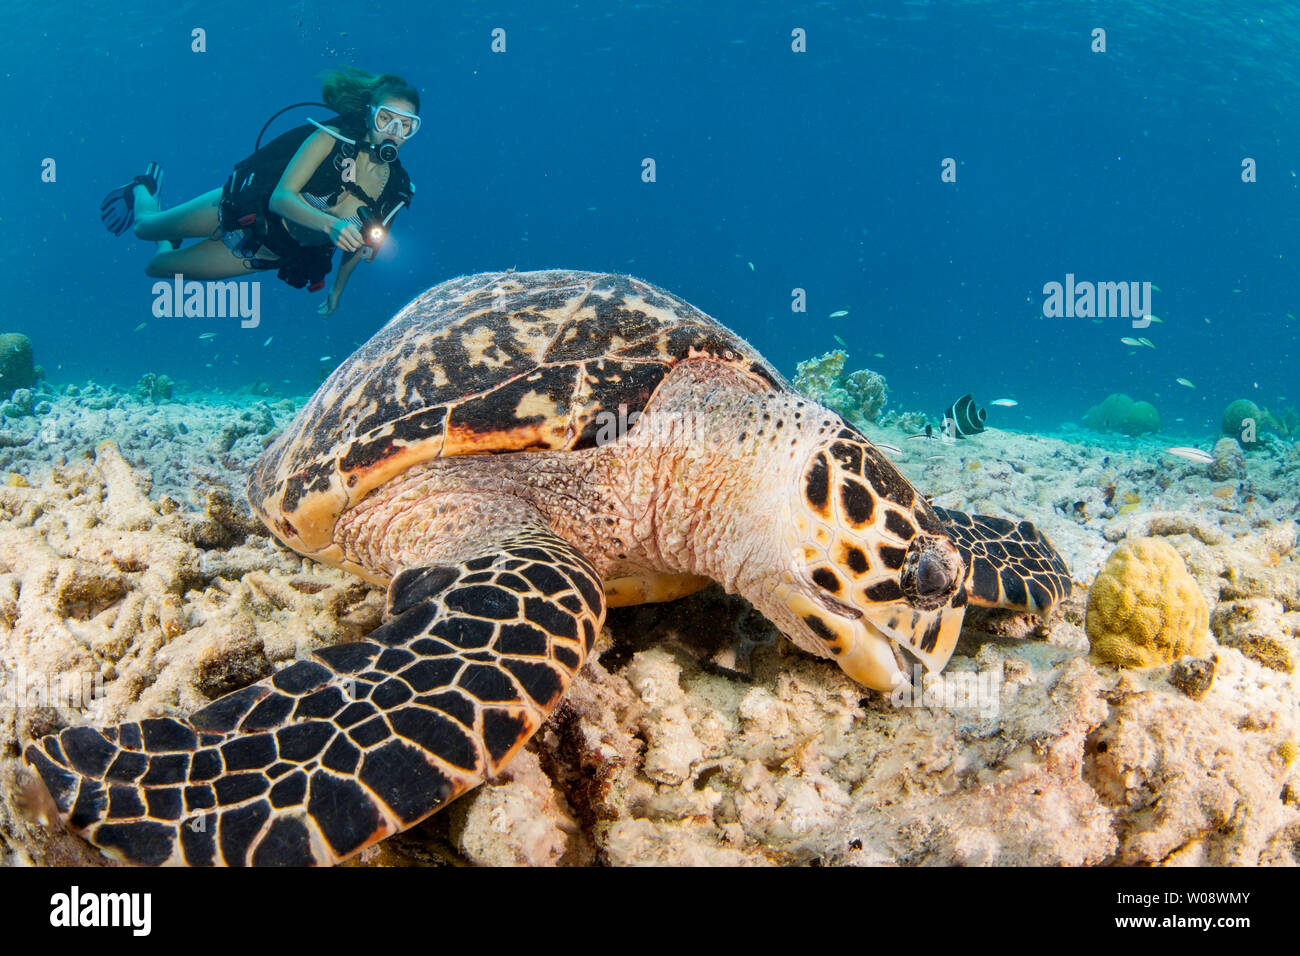 Hawksbill turtle, Eretmochelys imbricata, (endangered species) and diver (MR) off the island of Bonaire in the Caribbean. Stock Photo